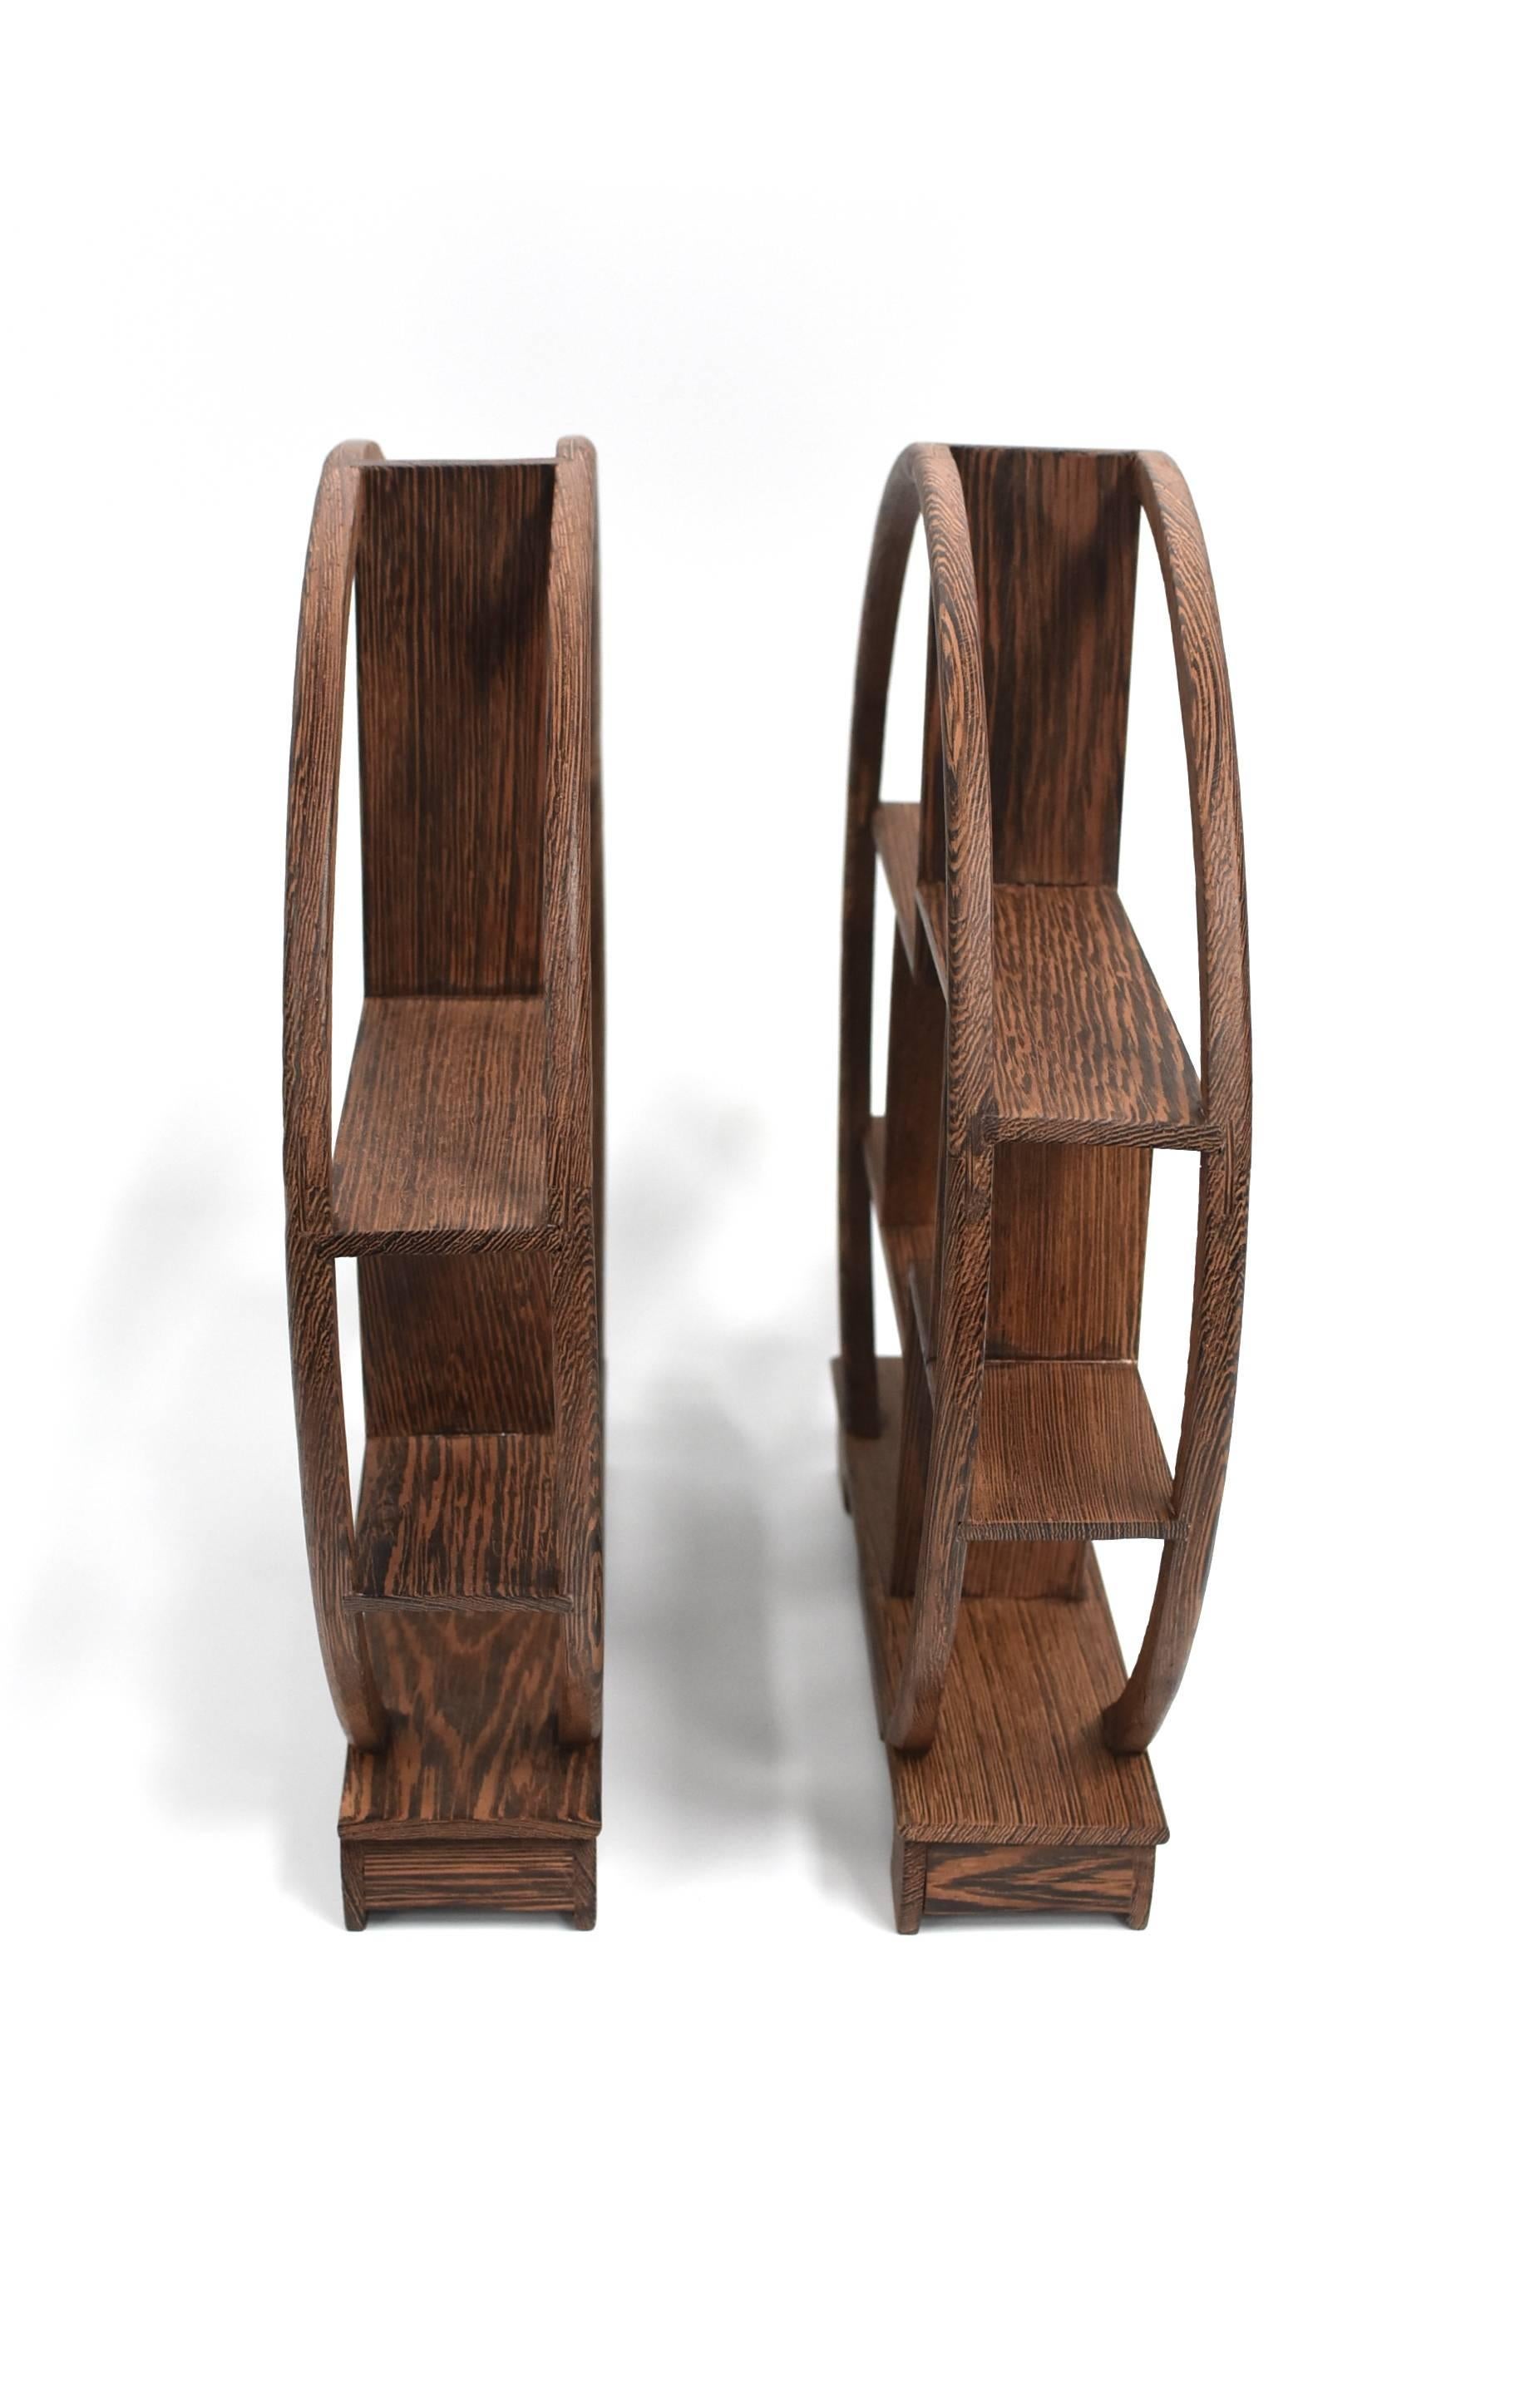 Pair of Small Display Stands, Mini Shelves, Solid Rosewood 10